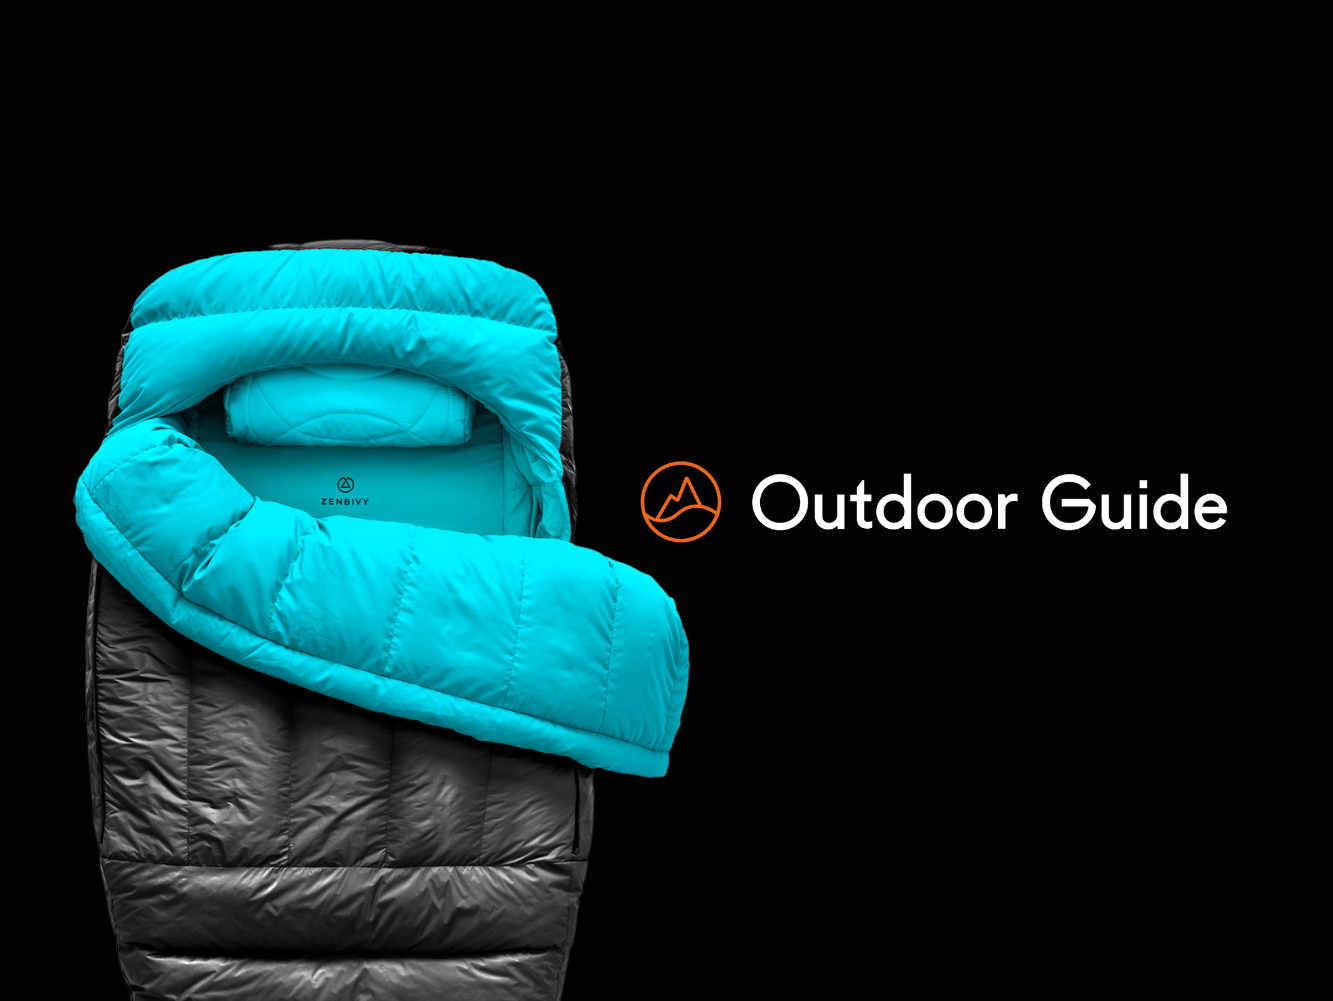 TEST: Light Bed -12°C, Outdoor Guide